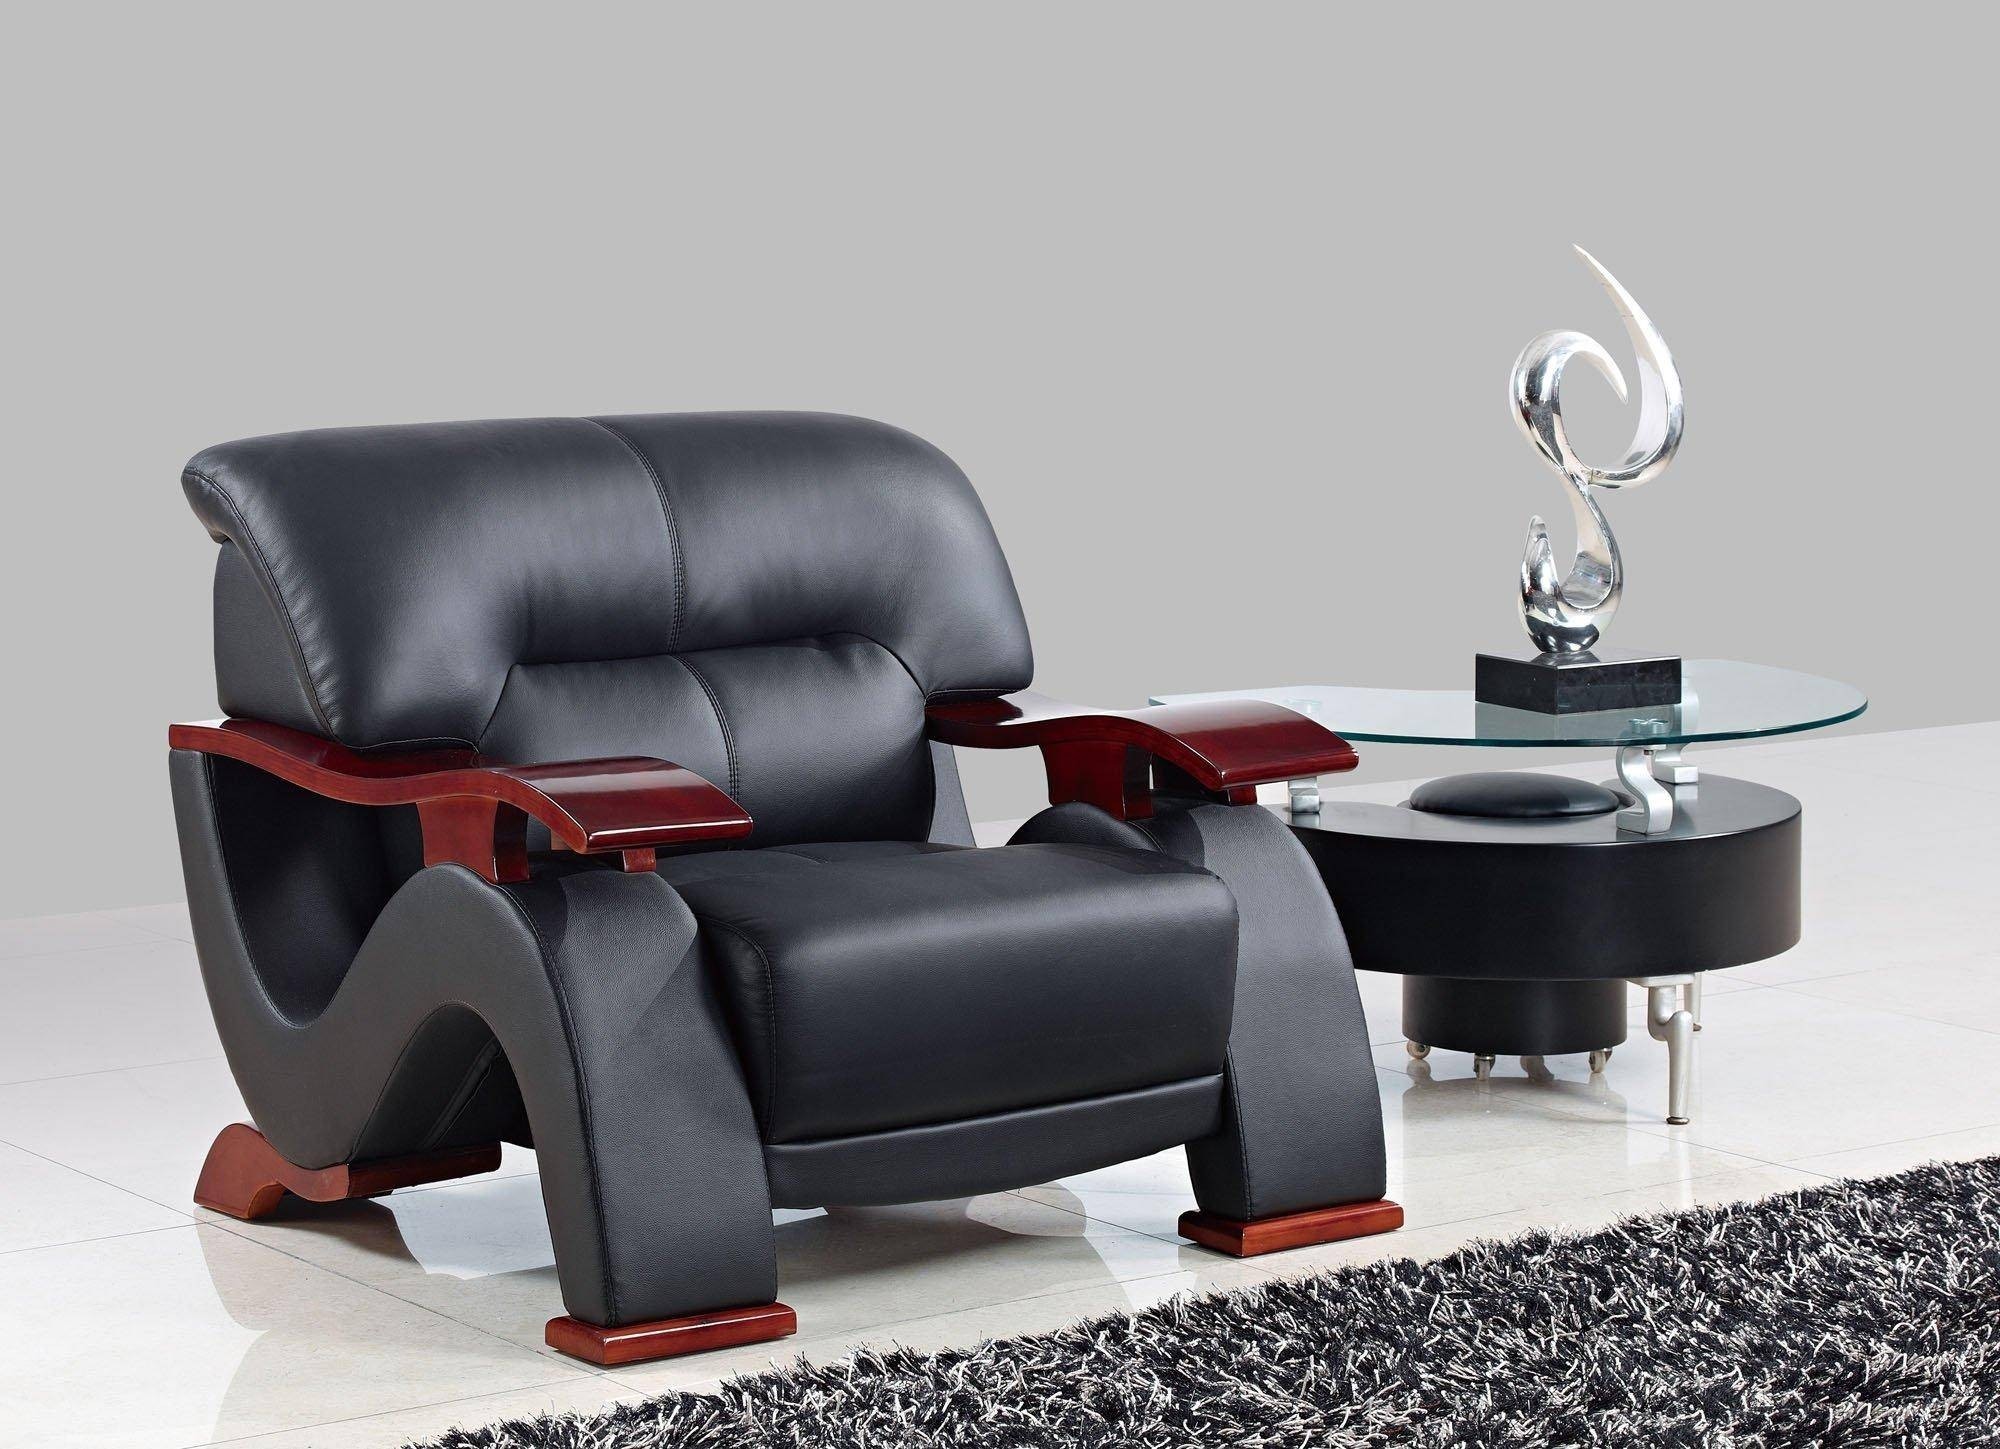 Oversized recliner chair